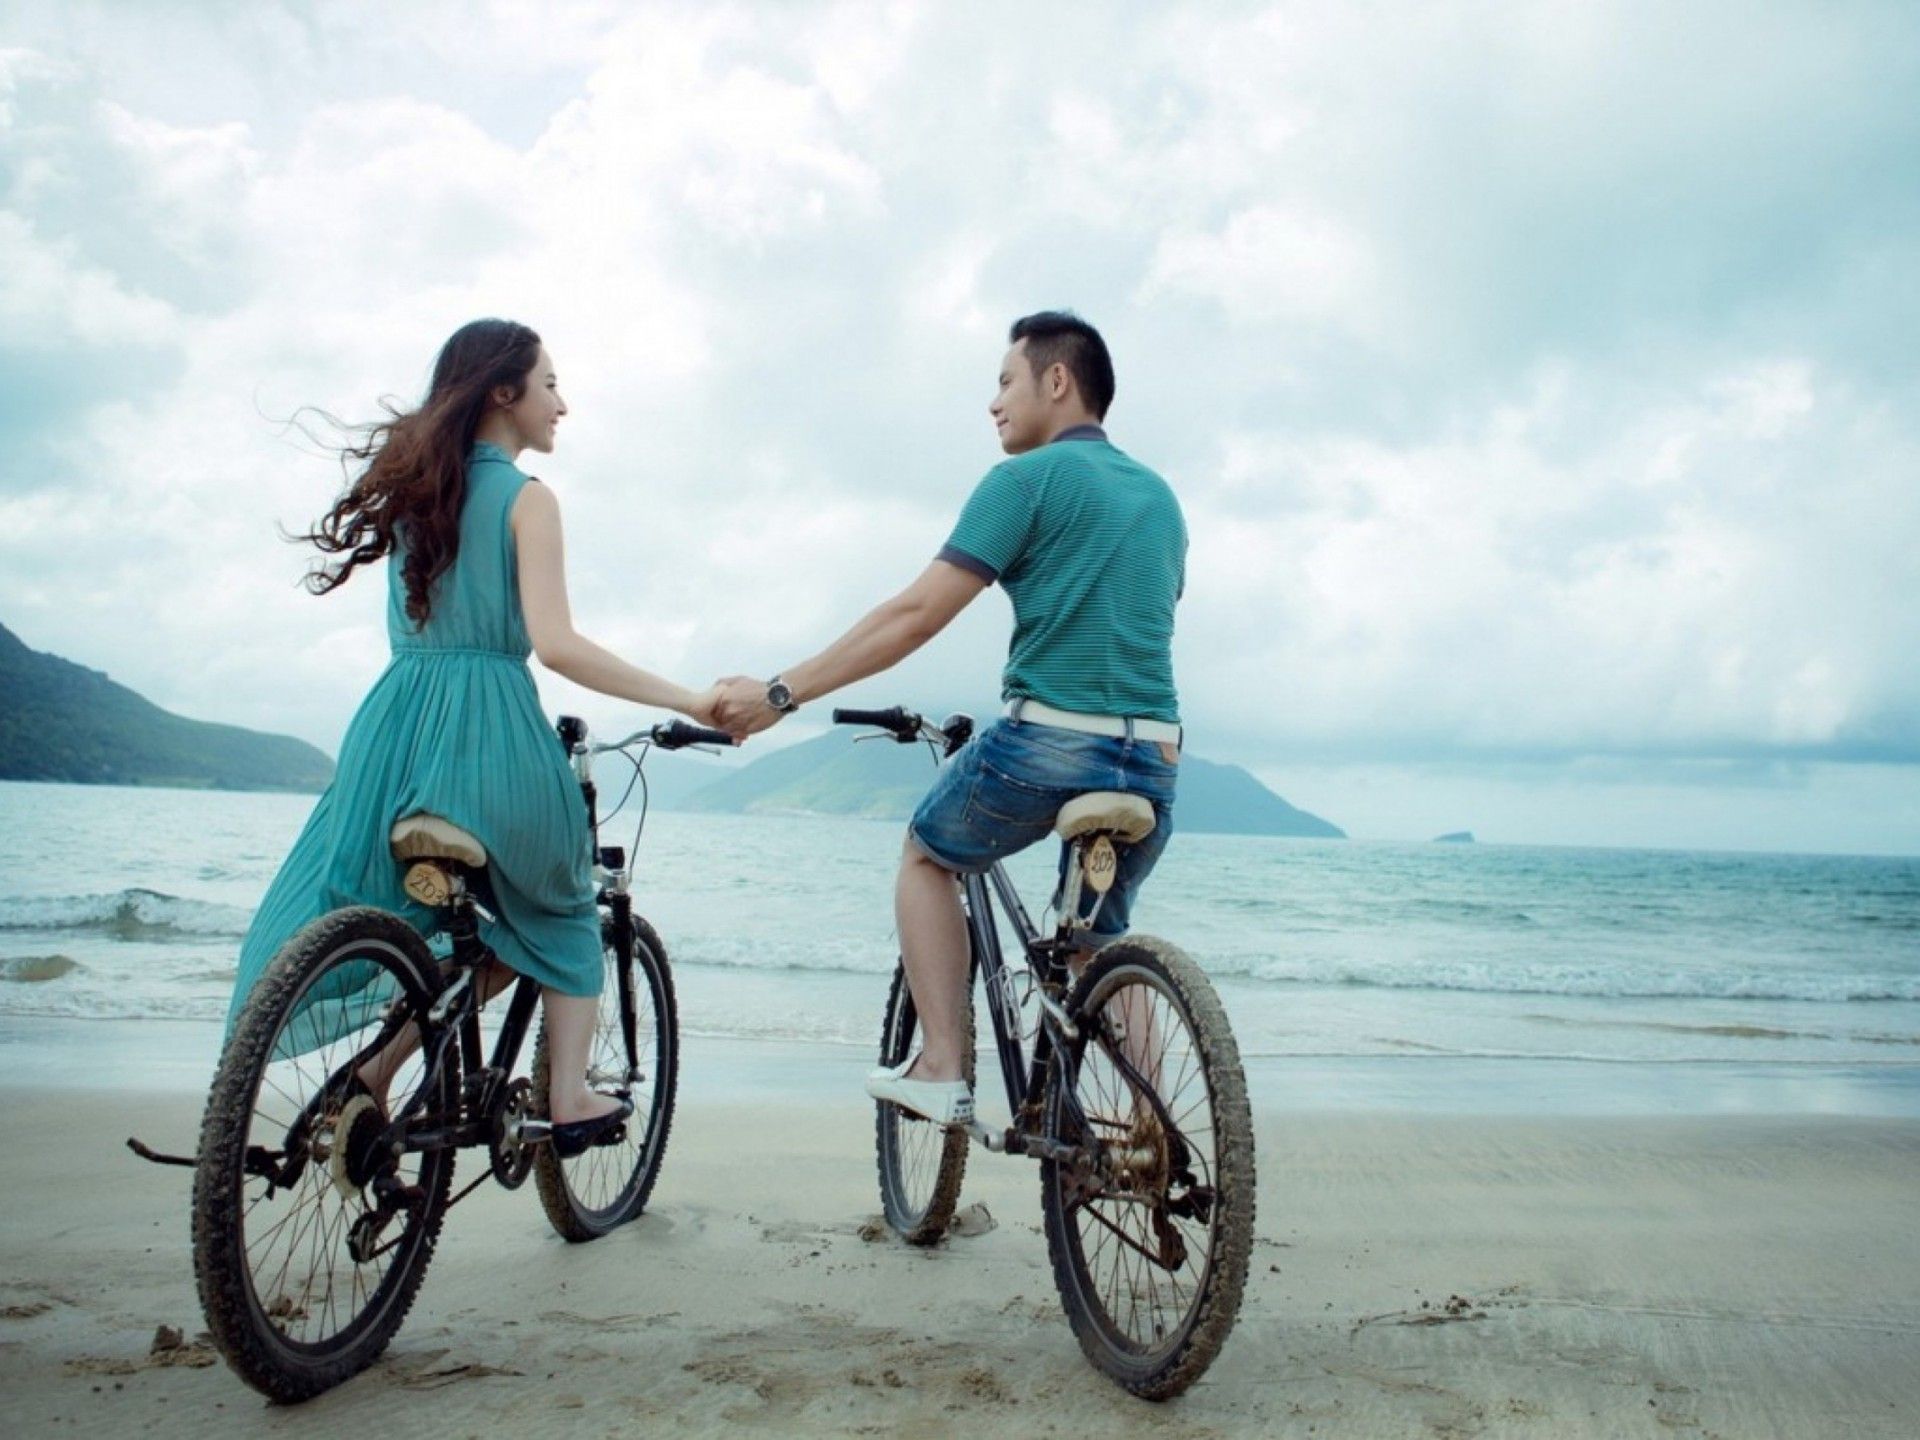 Couple Bicycle Riding On Beach HD Wallpaper 75, Wallpaper13.com